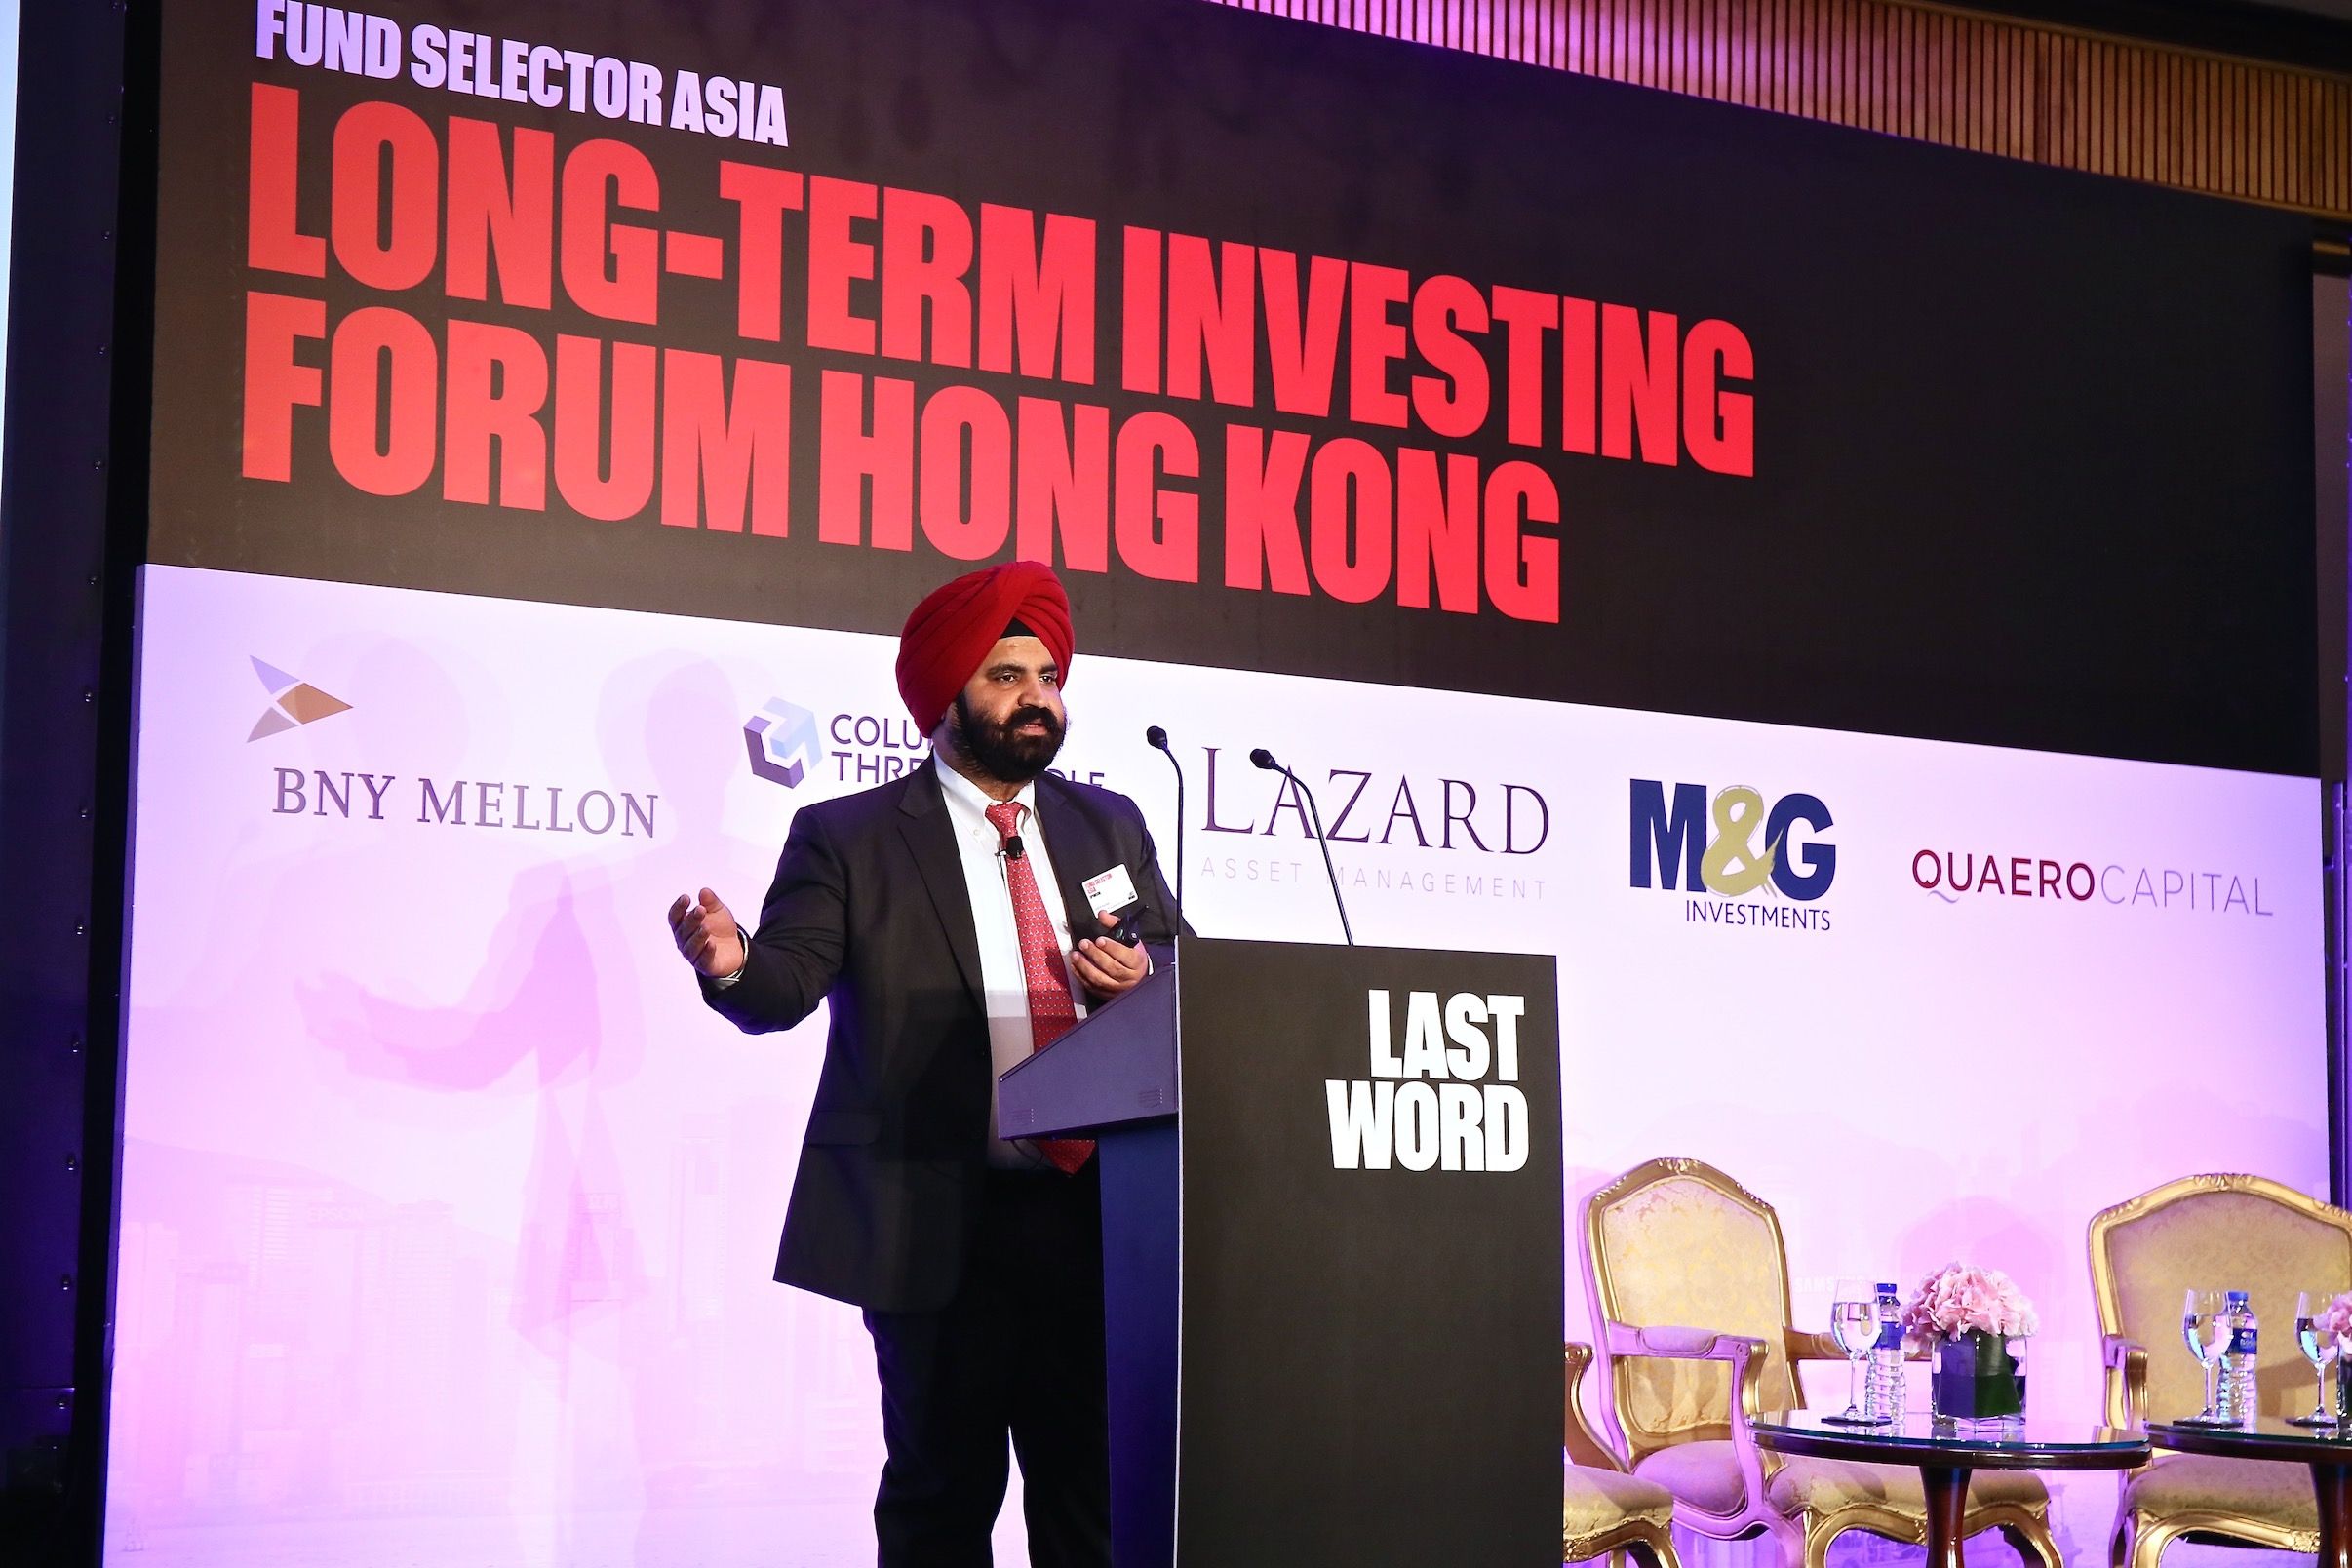 Presentation by Ashish Kochar, co-manager, Threadneedle Global Extended Alpha Fund, Columbia Threadneedle Investments